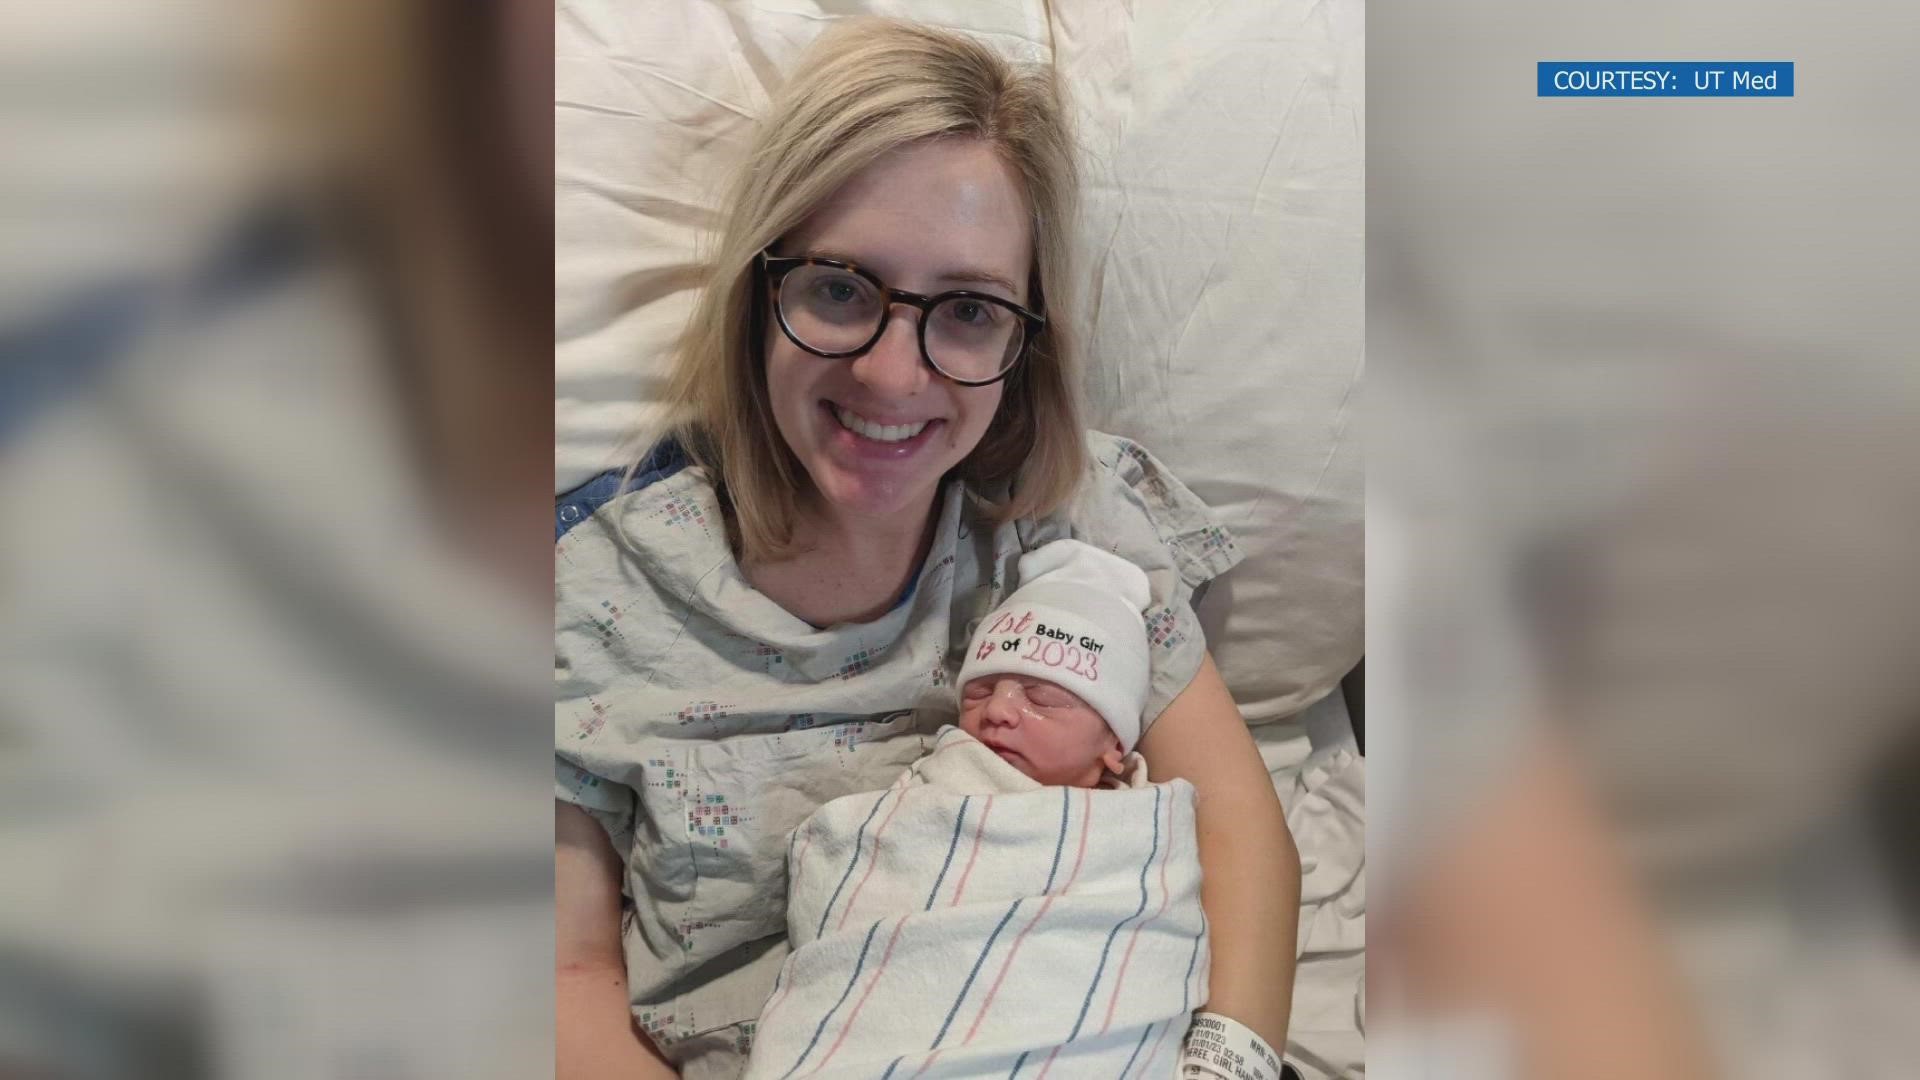 2023 has begun with some newborns for some families! Meet Whitley Rae, who was born at UT Medical Center and Roosevelt Calvin who was born at Fort Sanders.